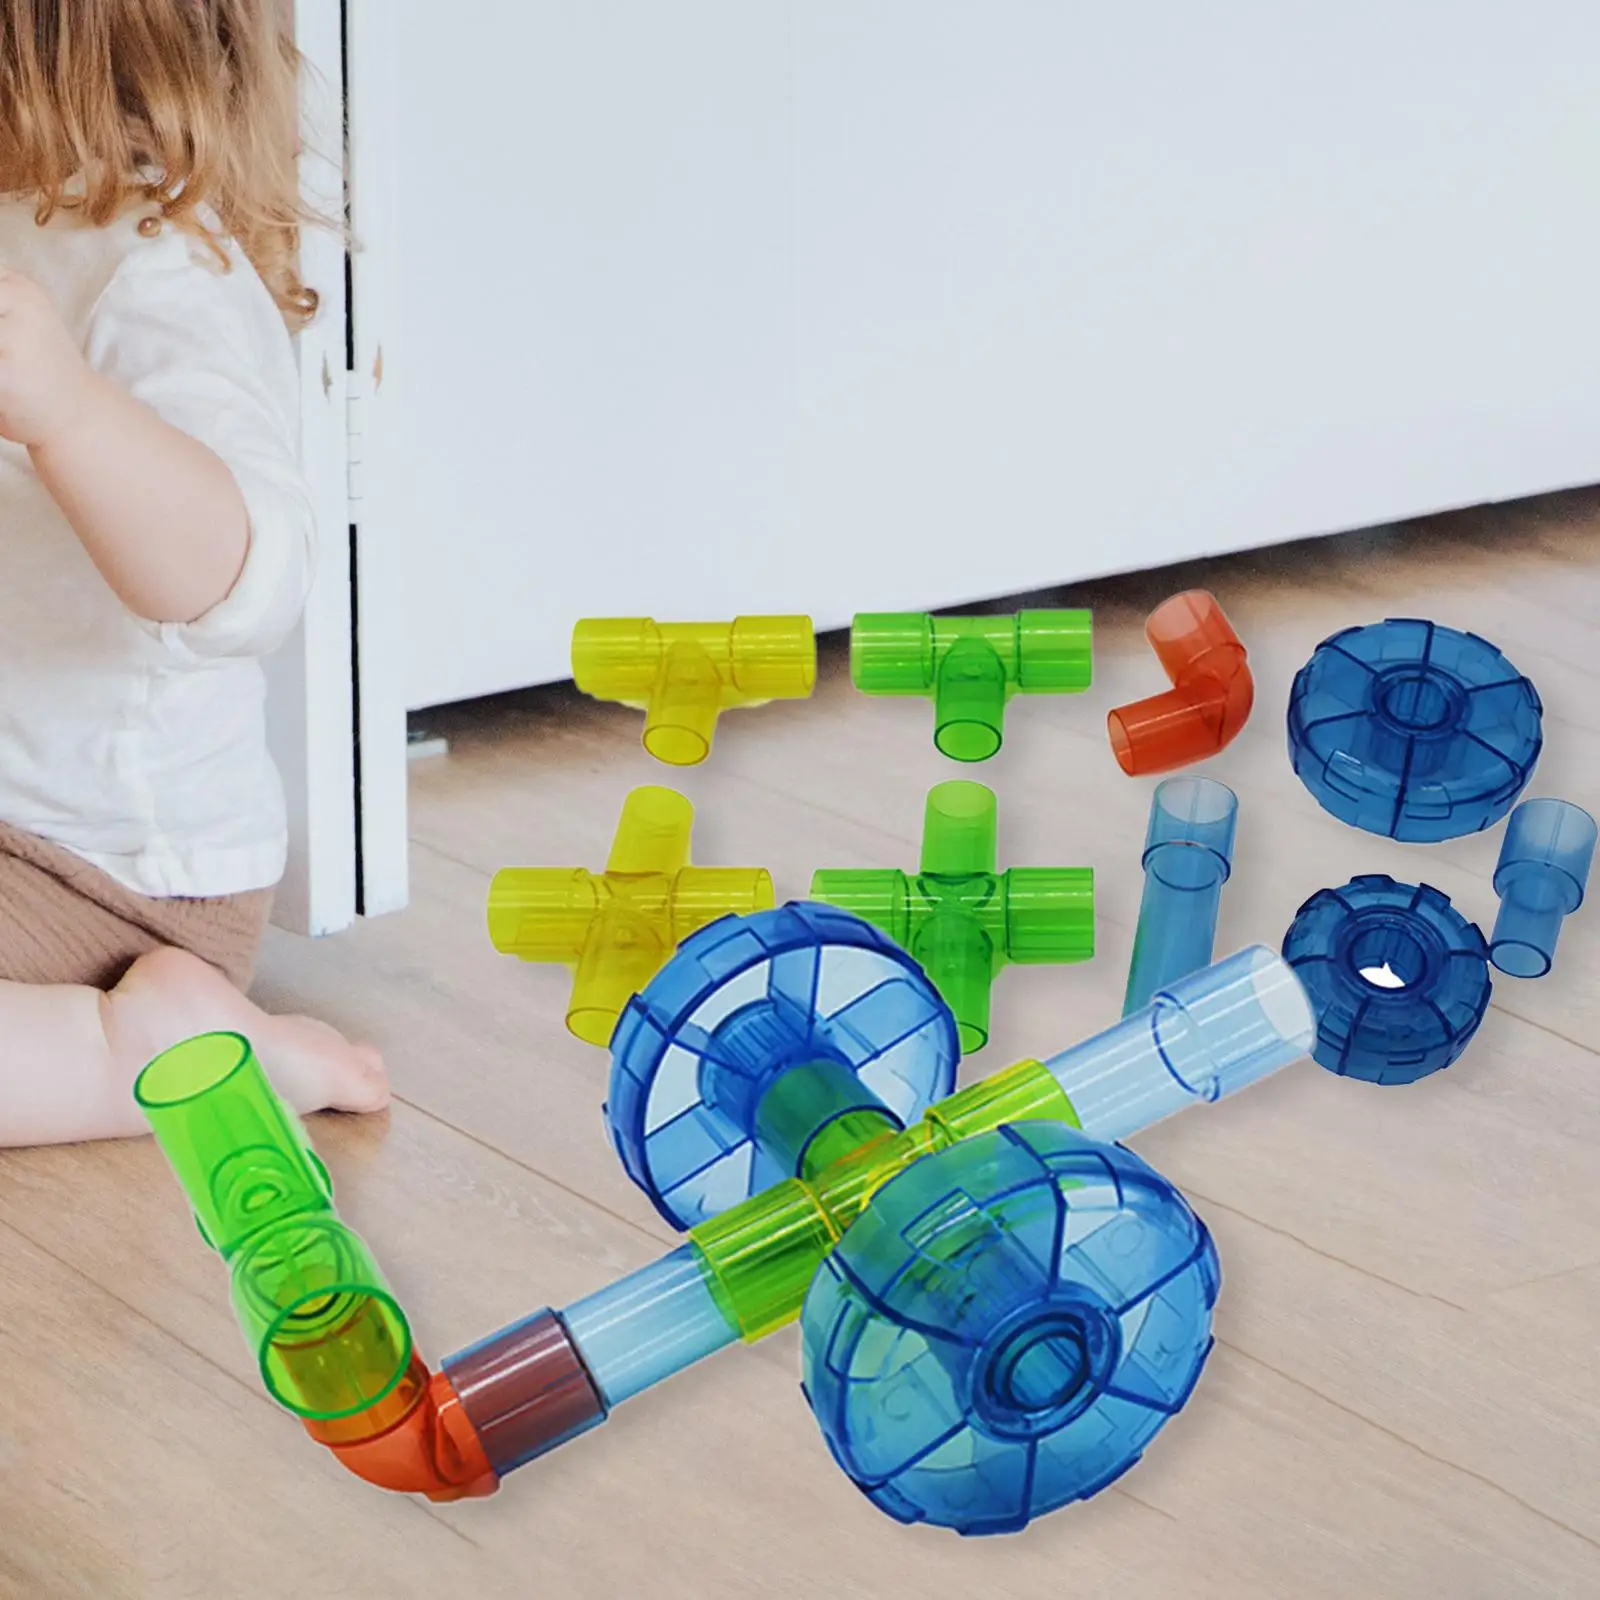 Pipe Tube Blocks Toy Construction Building Toy Early Learning Educational Toy Sensory Toy for Children Preschool Kids